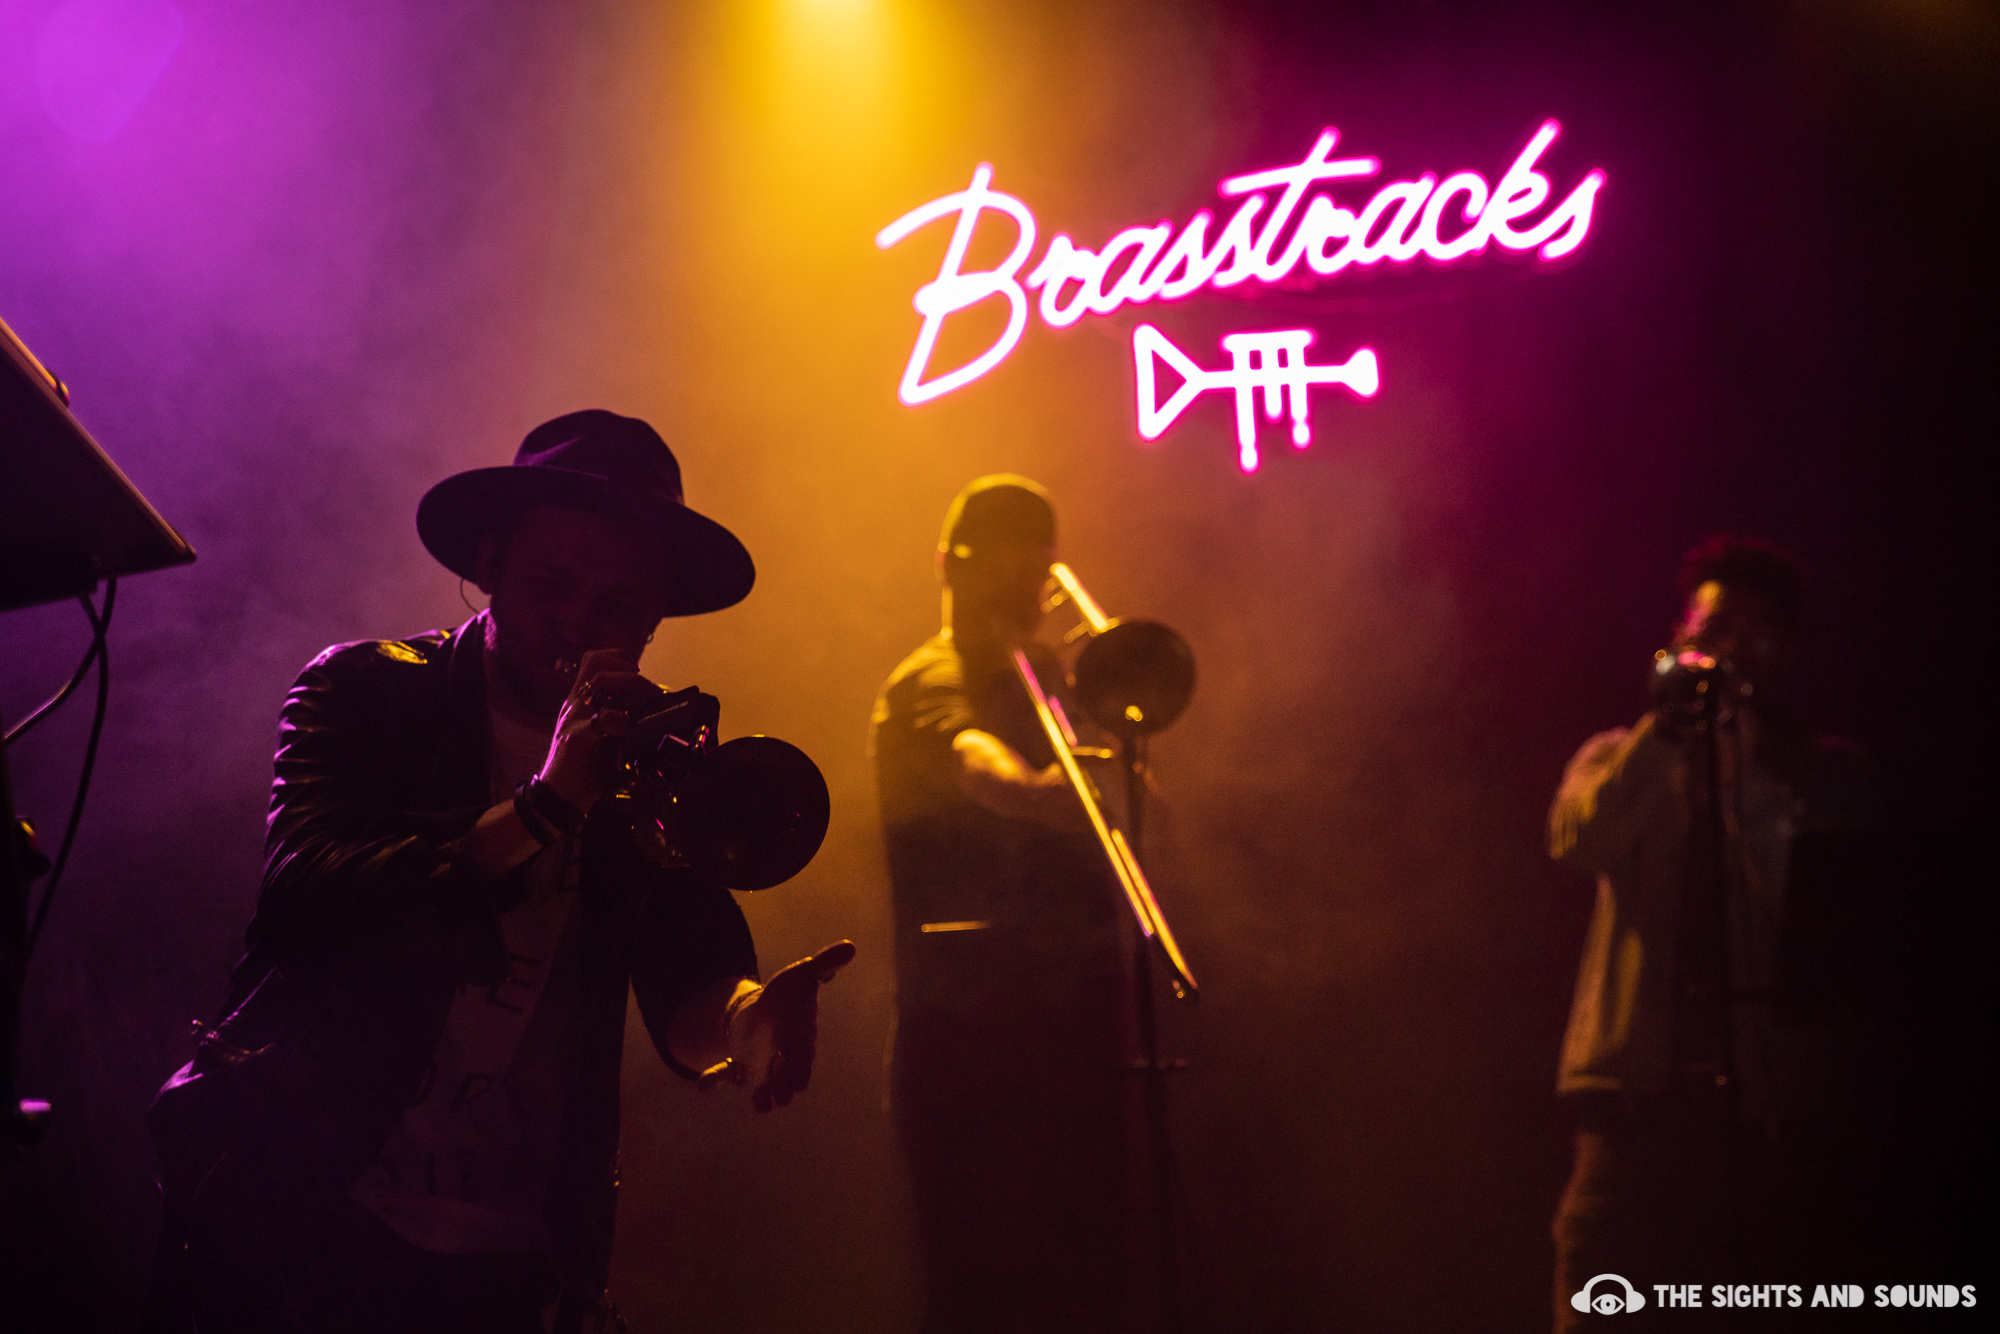 Brasstracks Drops Dynamic New EP At Sold Out LA Show